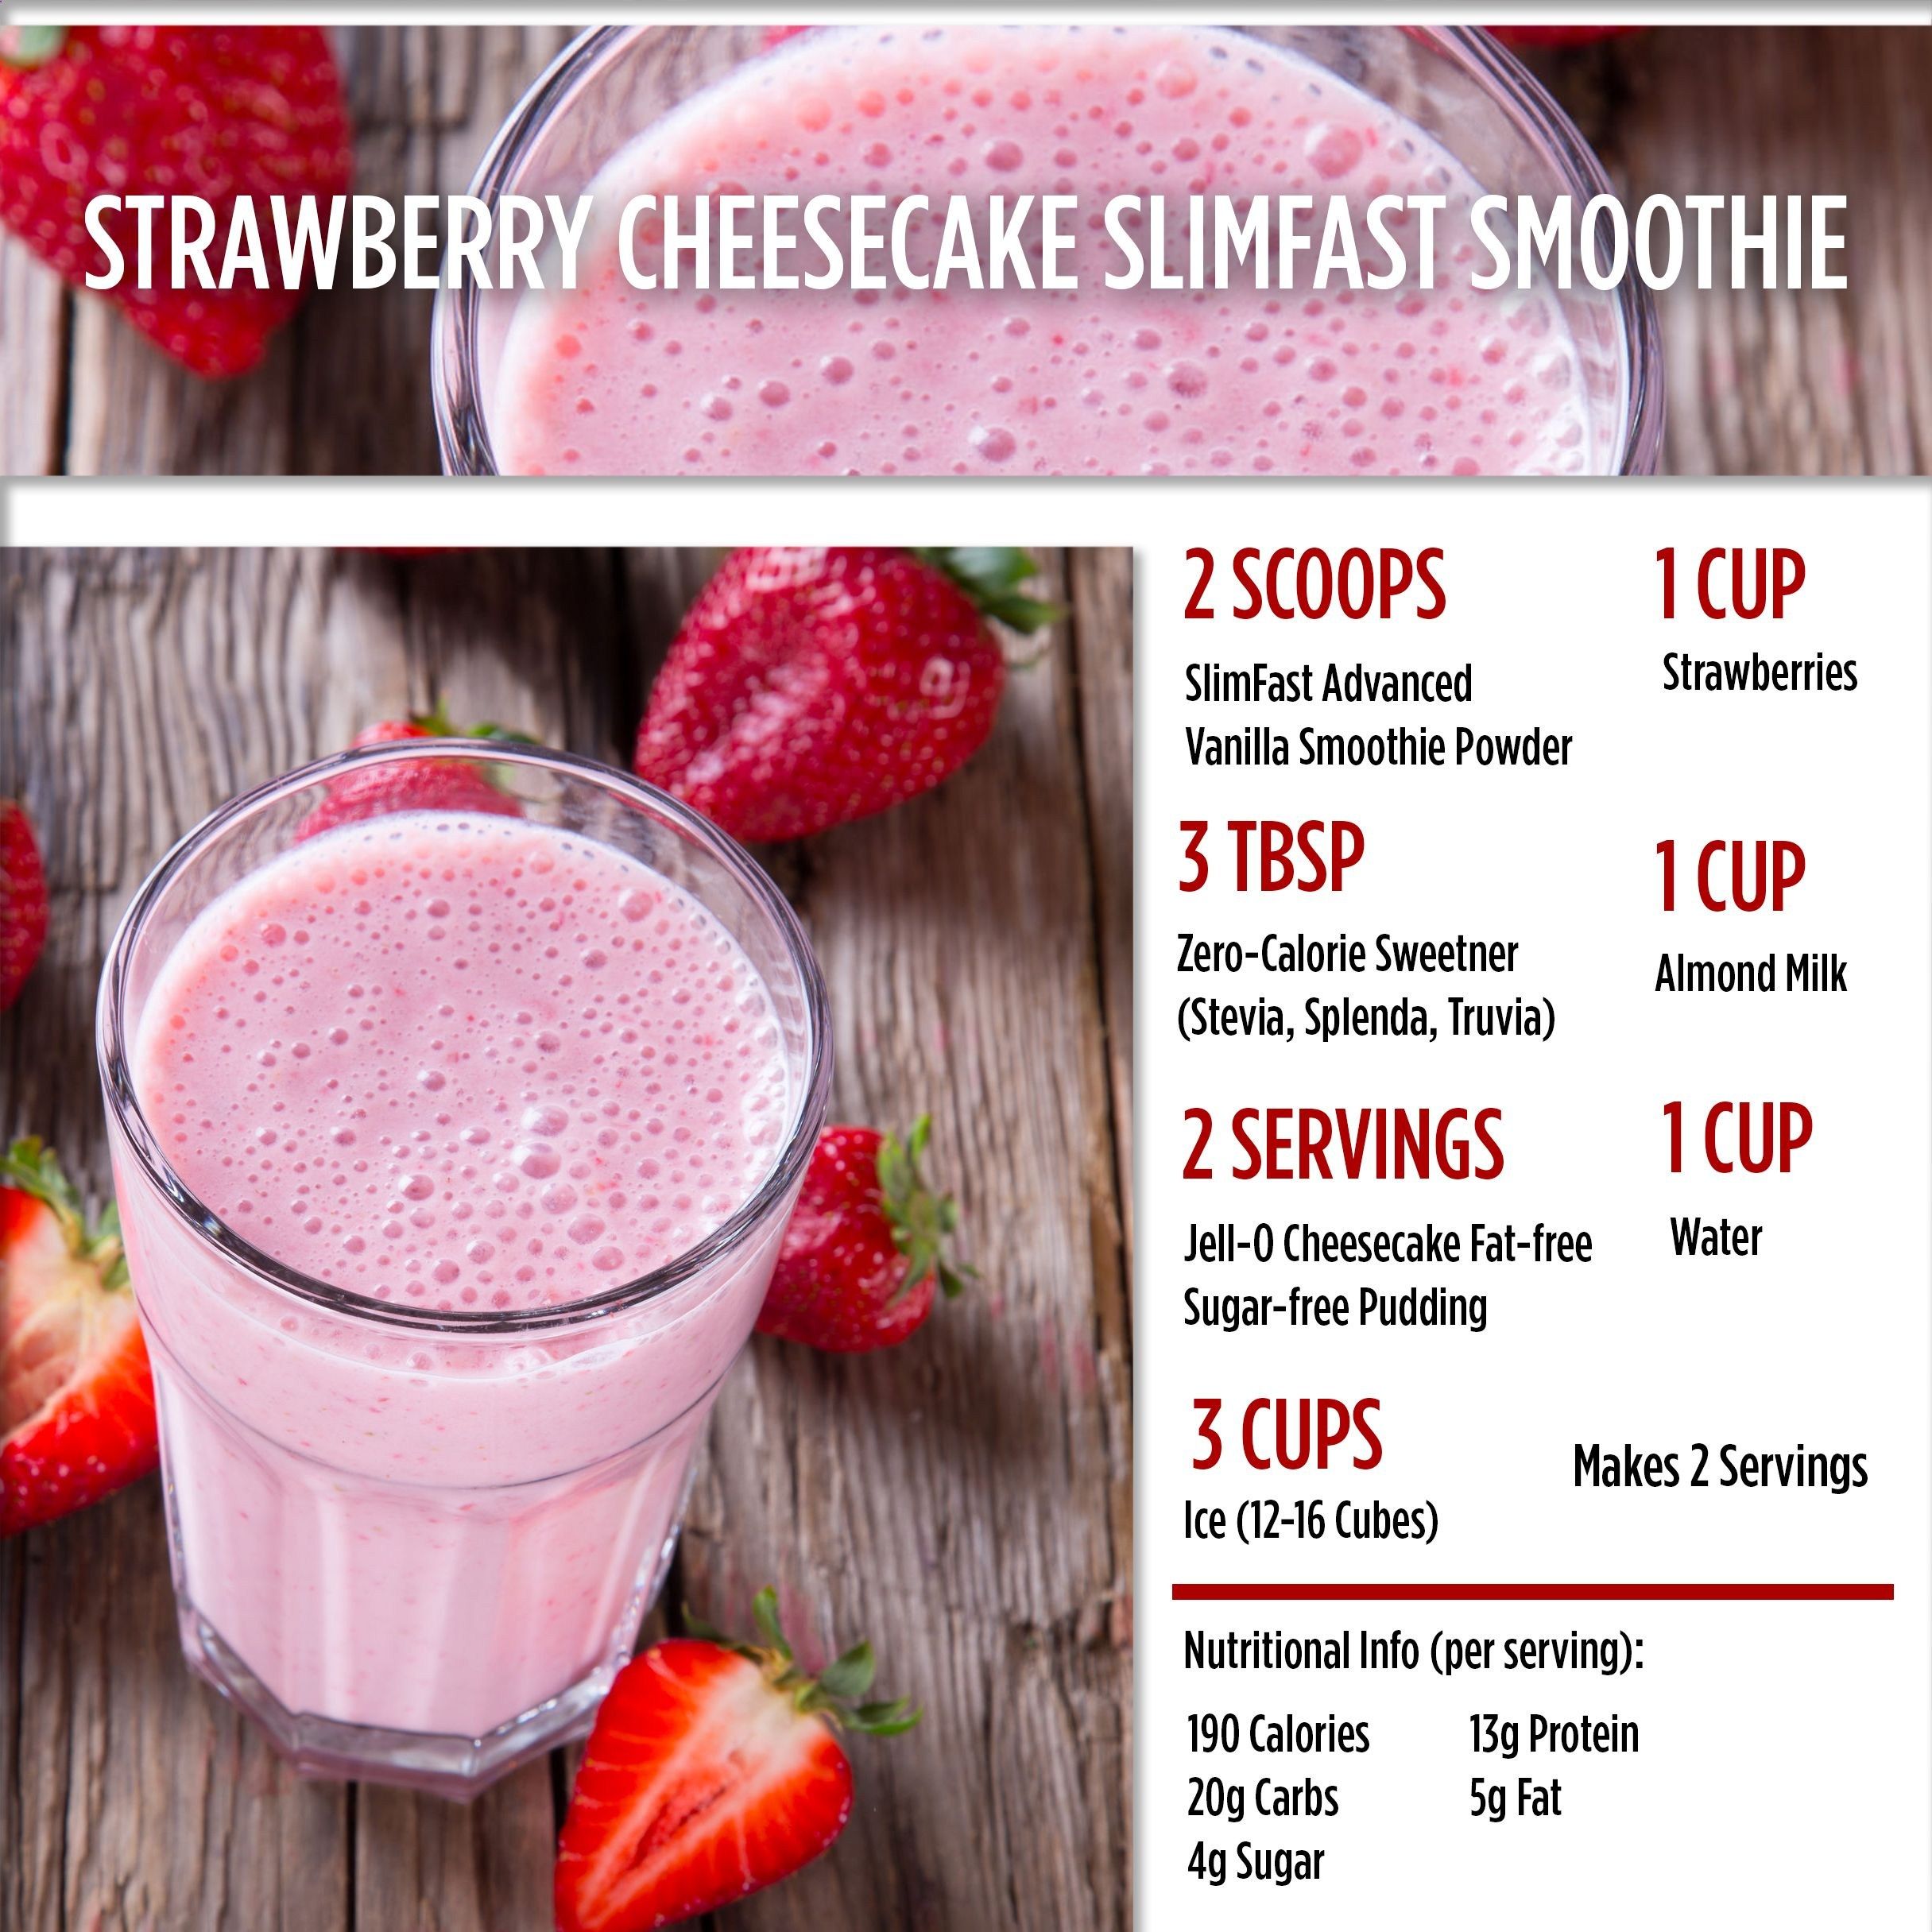 Strawberry Cheesecake Smoothie?! Need we say more? SlimFast